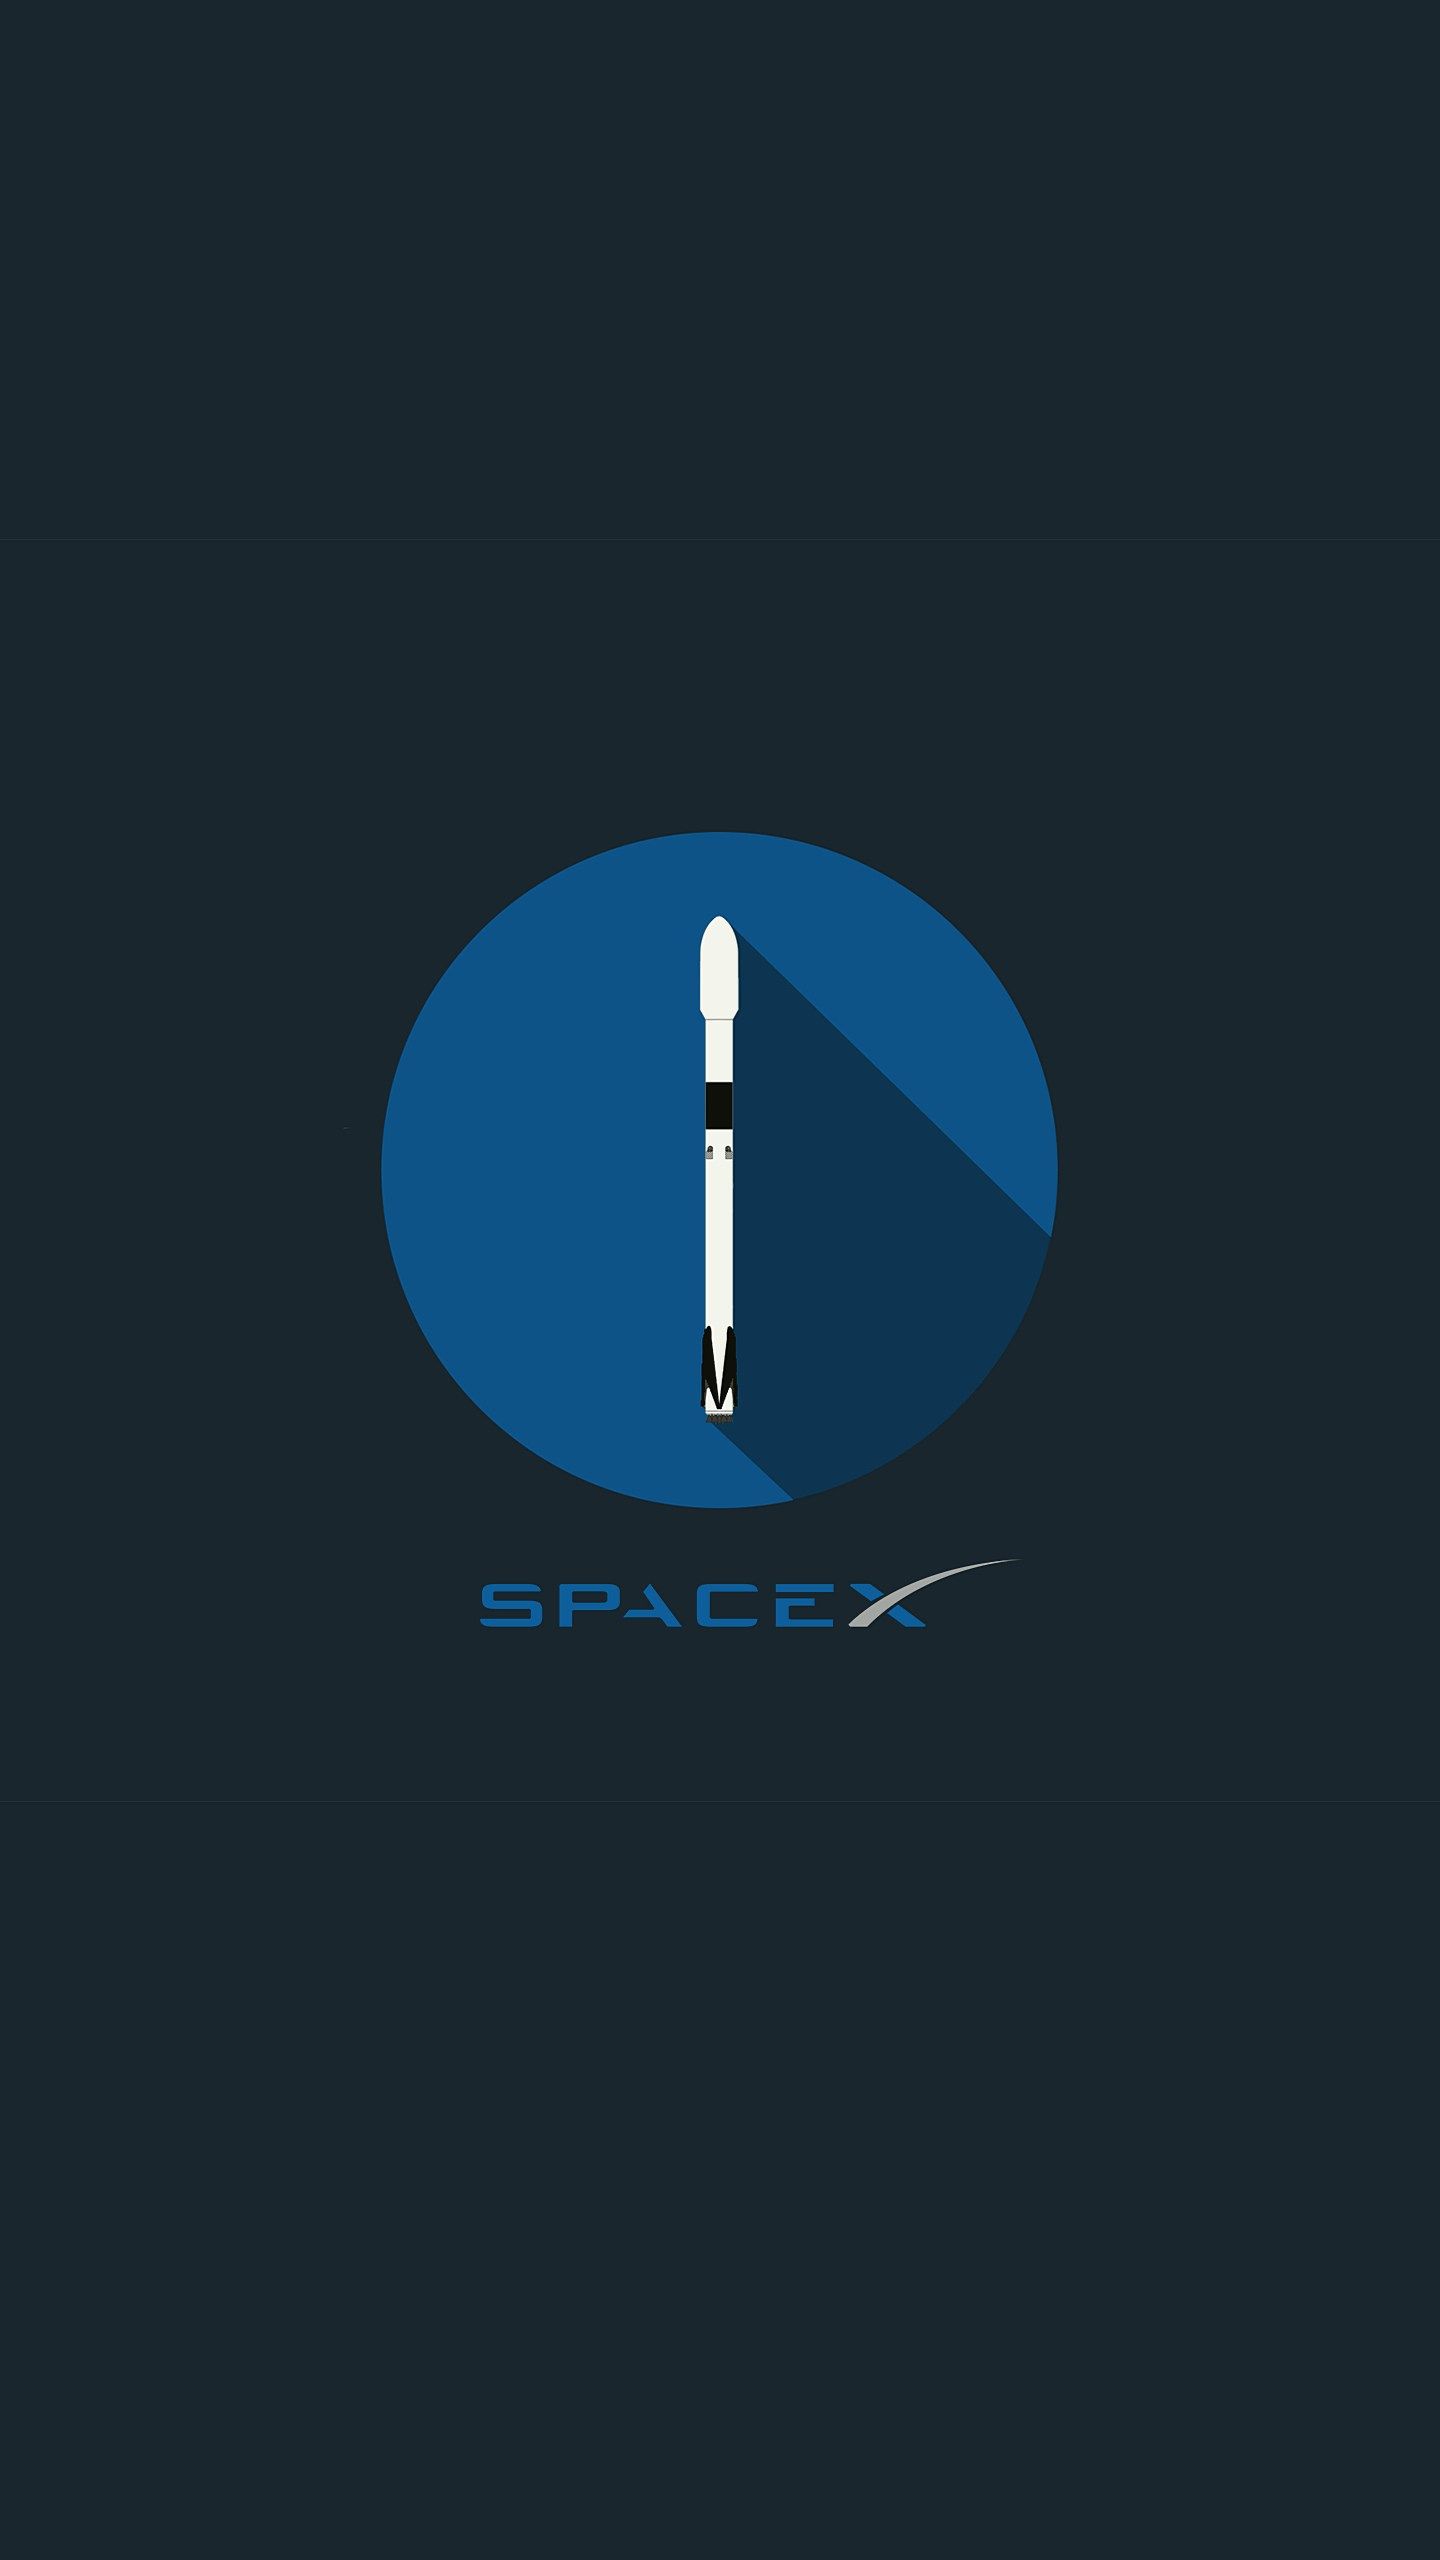 SpaceX AMOLED Wallpaper 1440X2560. iPhone wallpaper, Phone wallpaper, Wallpaper diy crafts